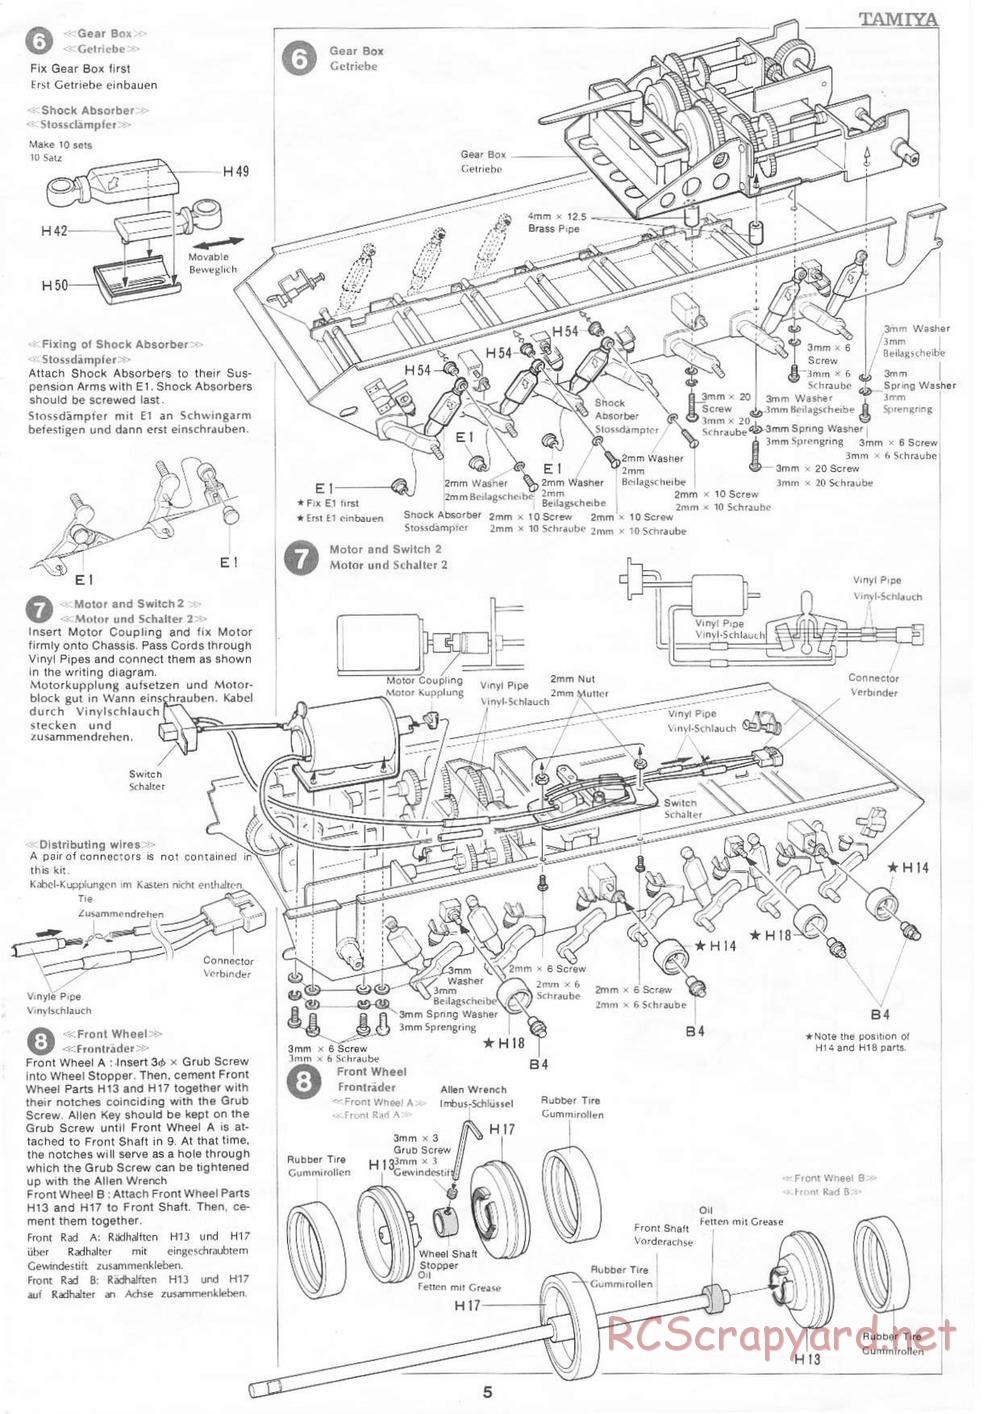 Tamiya - Leopard A4 - 1/16 Scale Chassis - Manual - Page 5